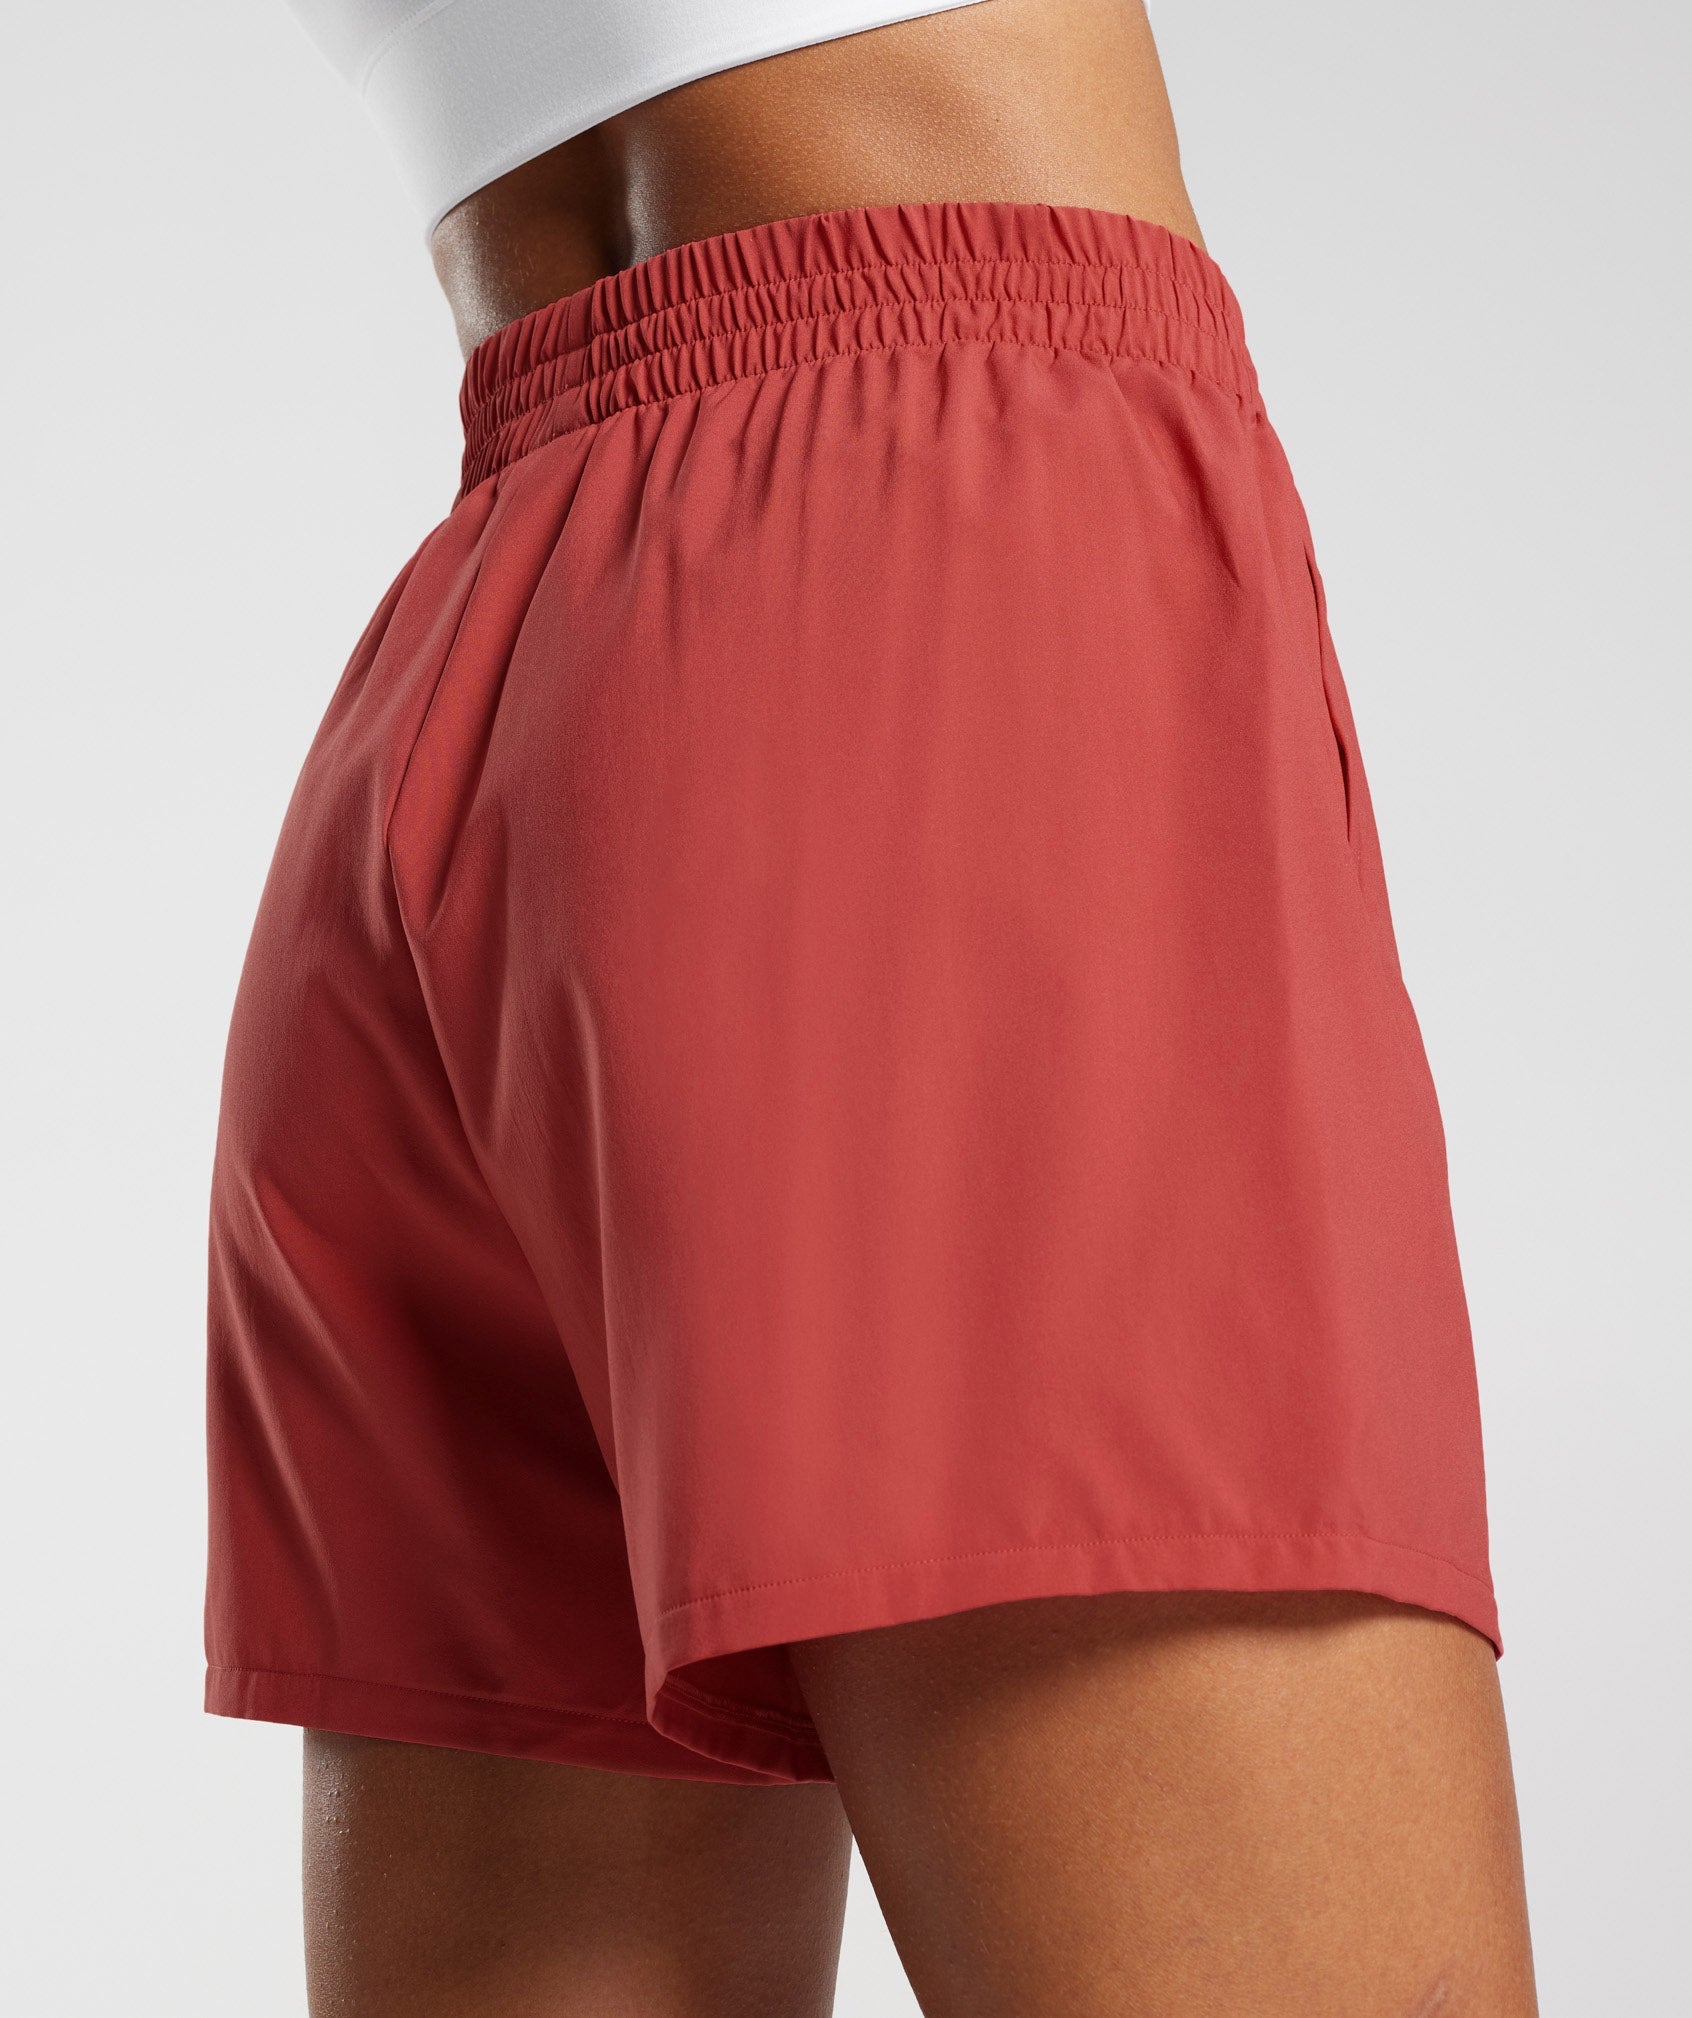 7 DAYS Active POCKETS TRAINING SHORTS - Leggings - red pear/dark red 